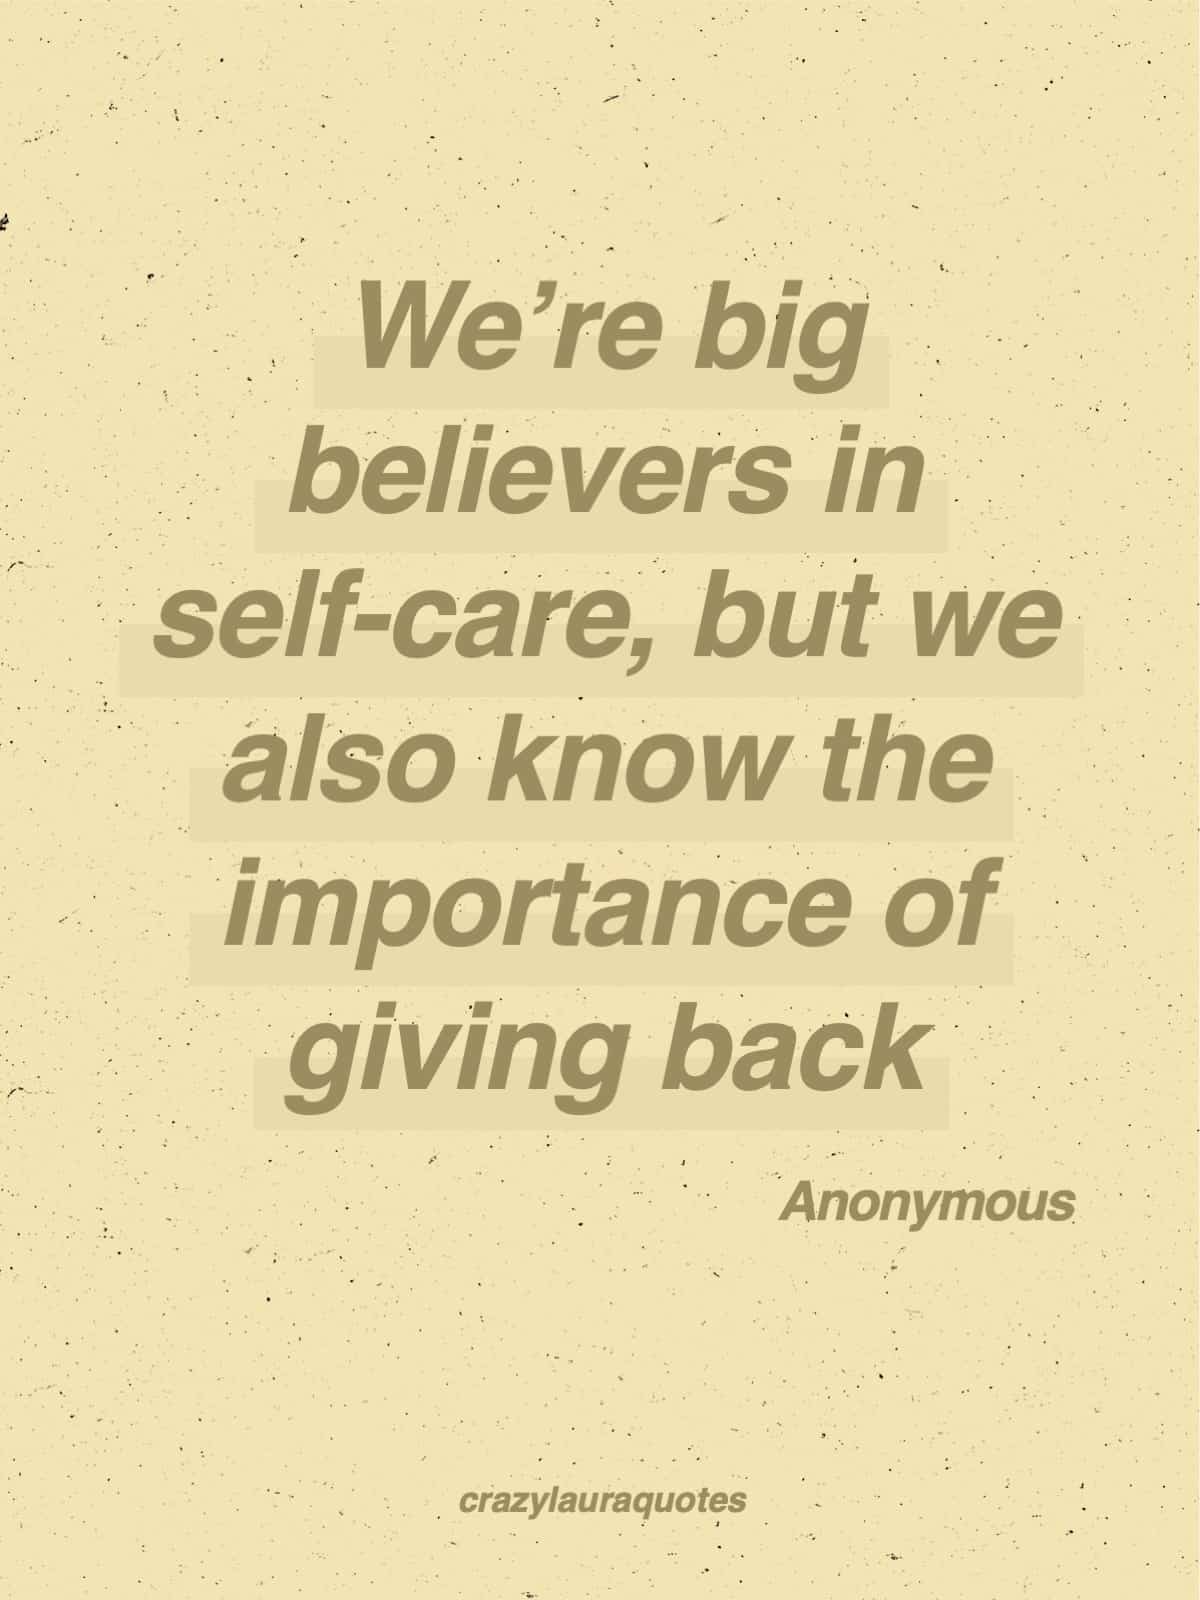 giving back is important quote